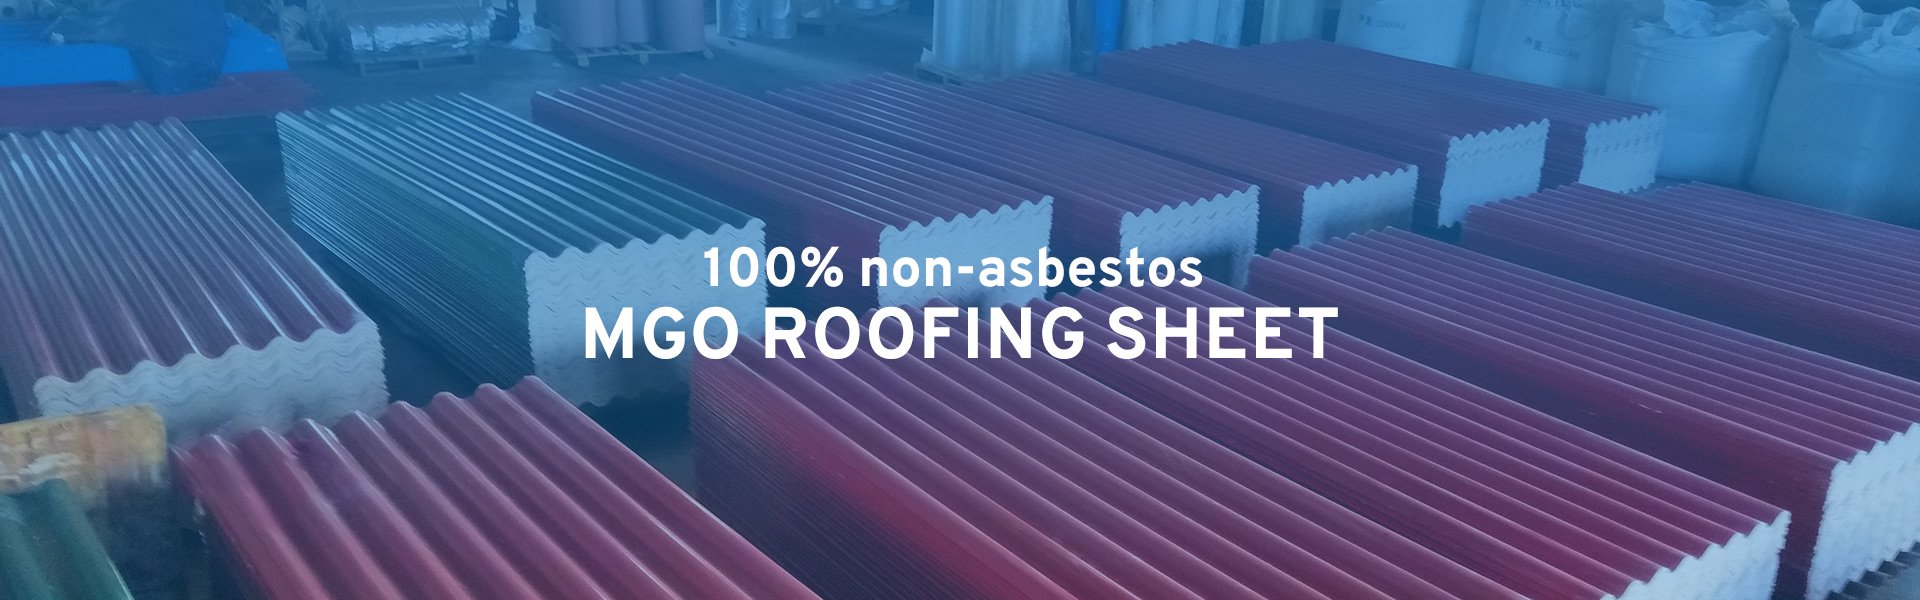 mgo-roofing-sheet